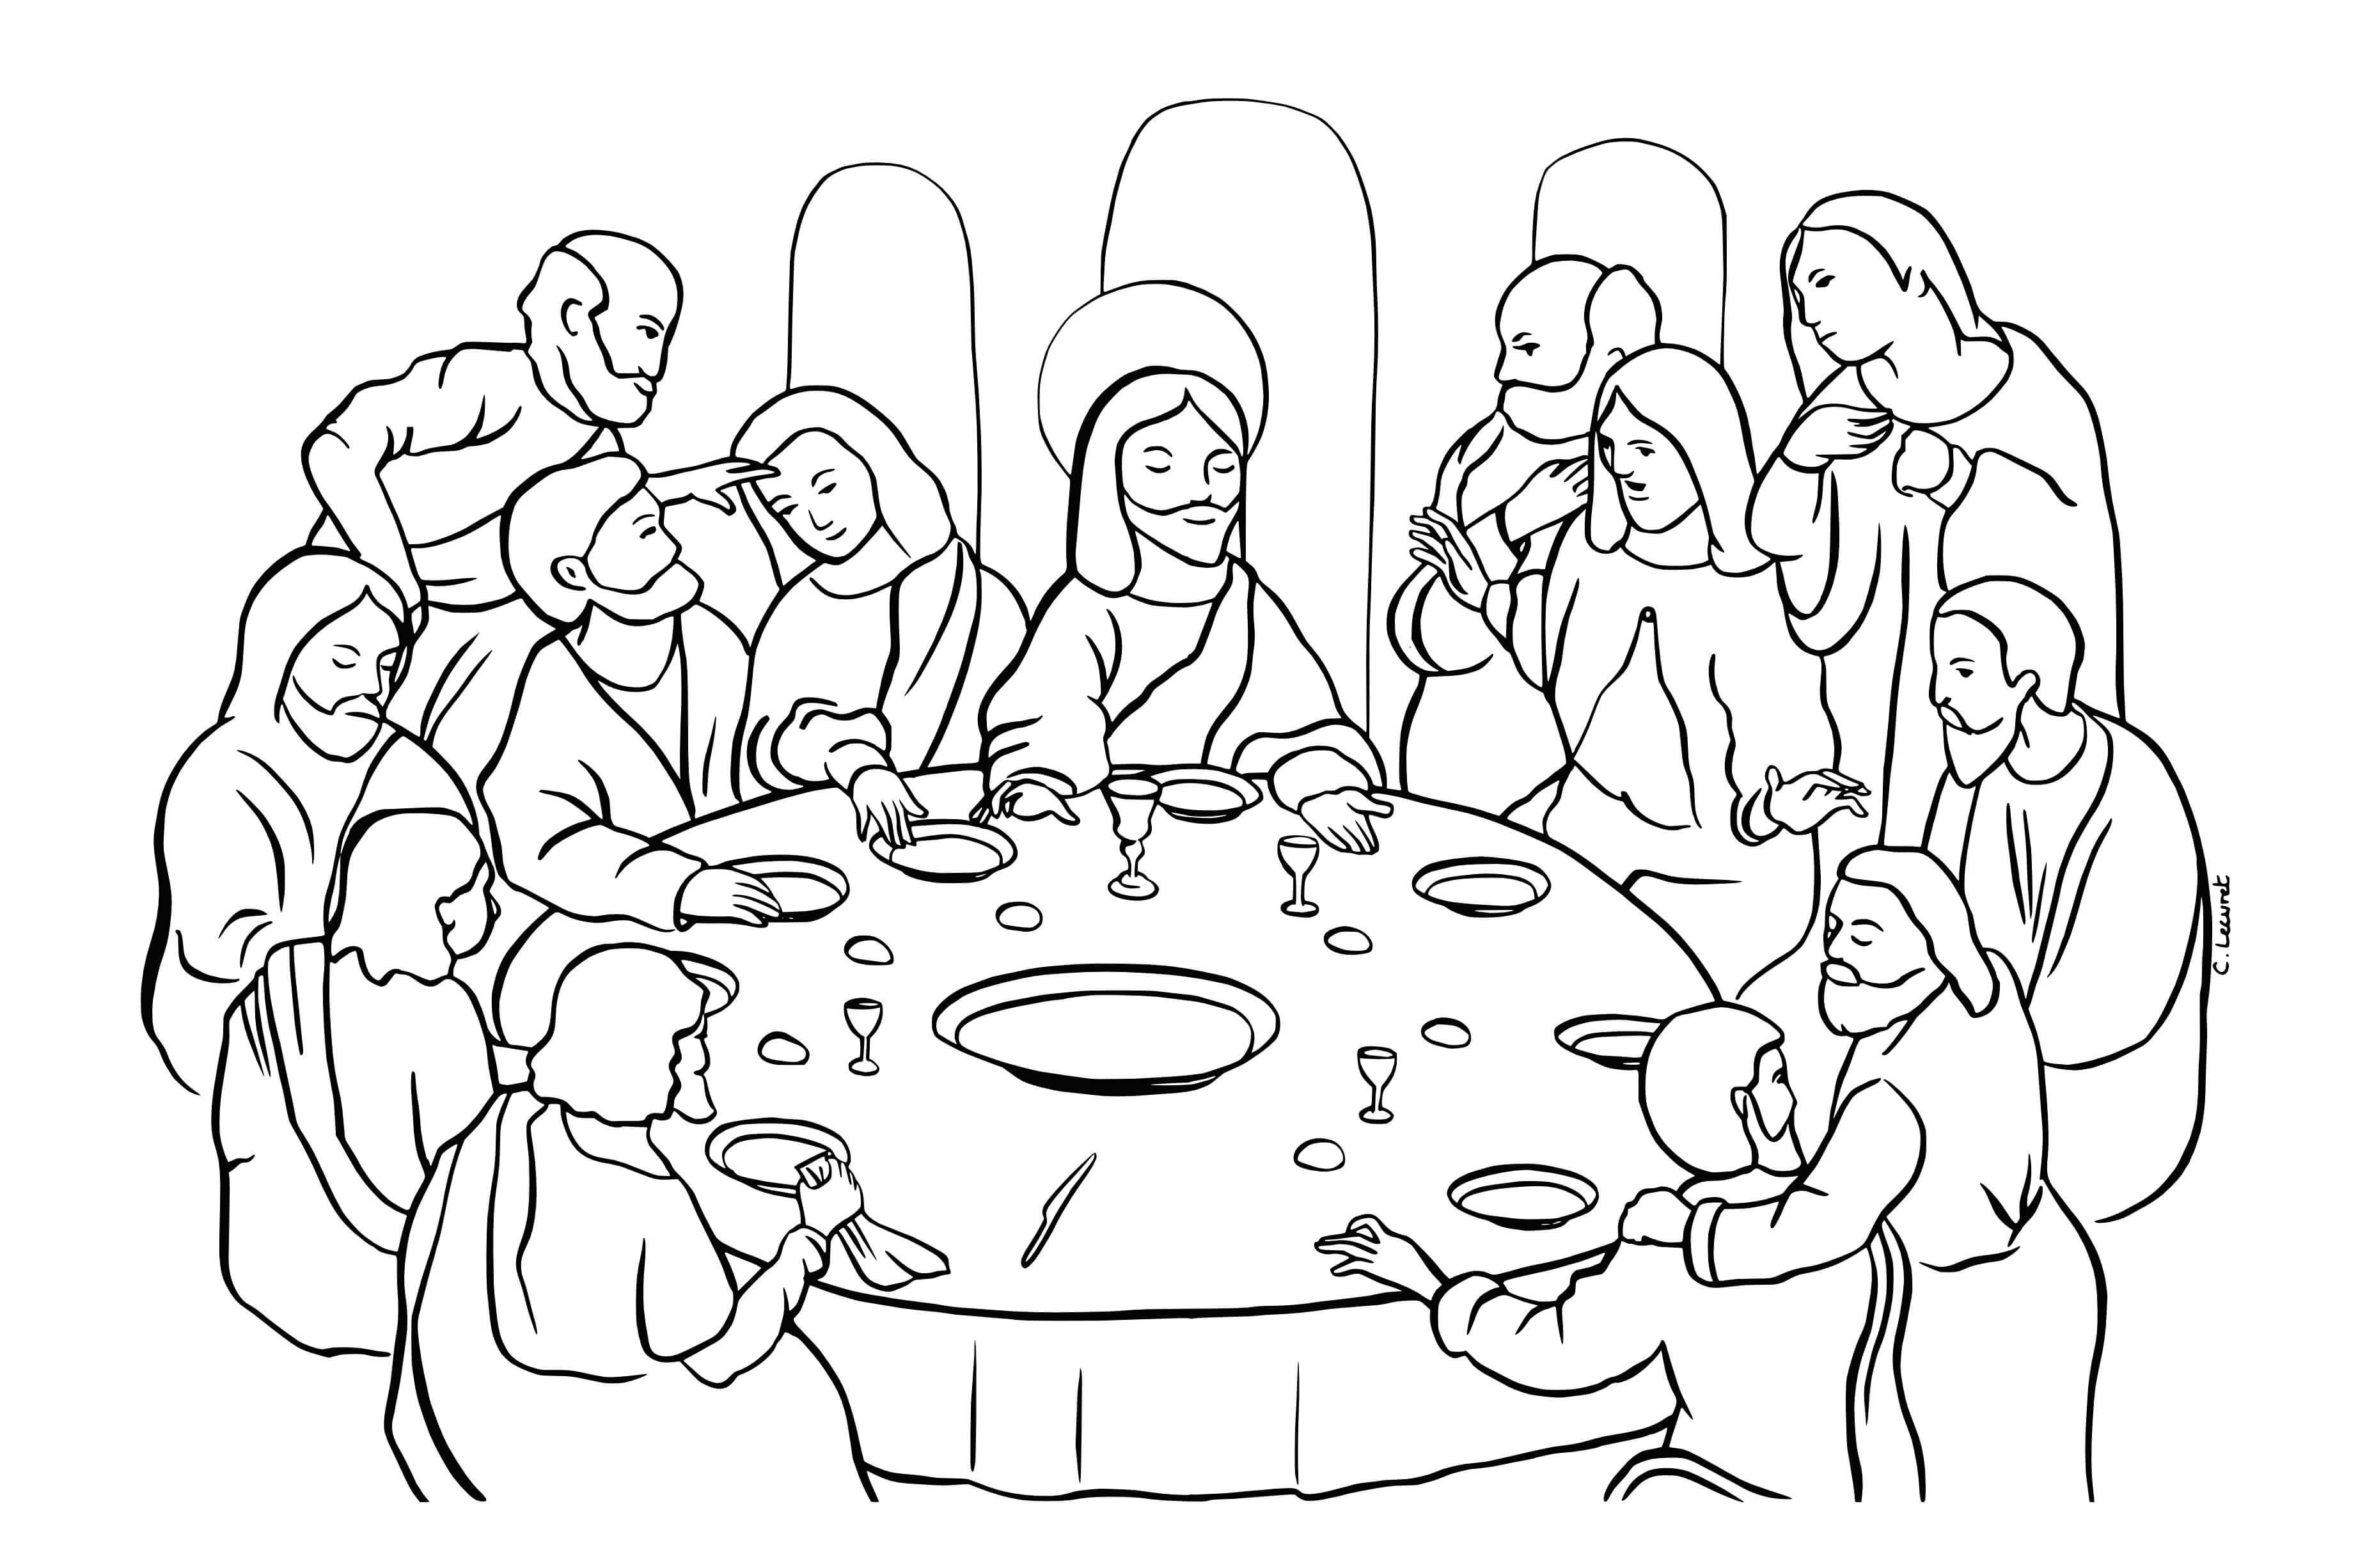 Last Supper Coloring Page 19 Kids Health Coloring Pages Download